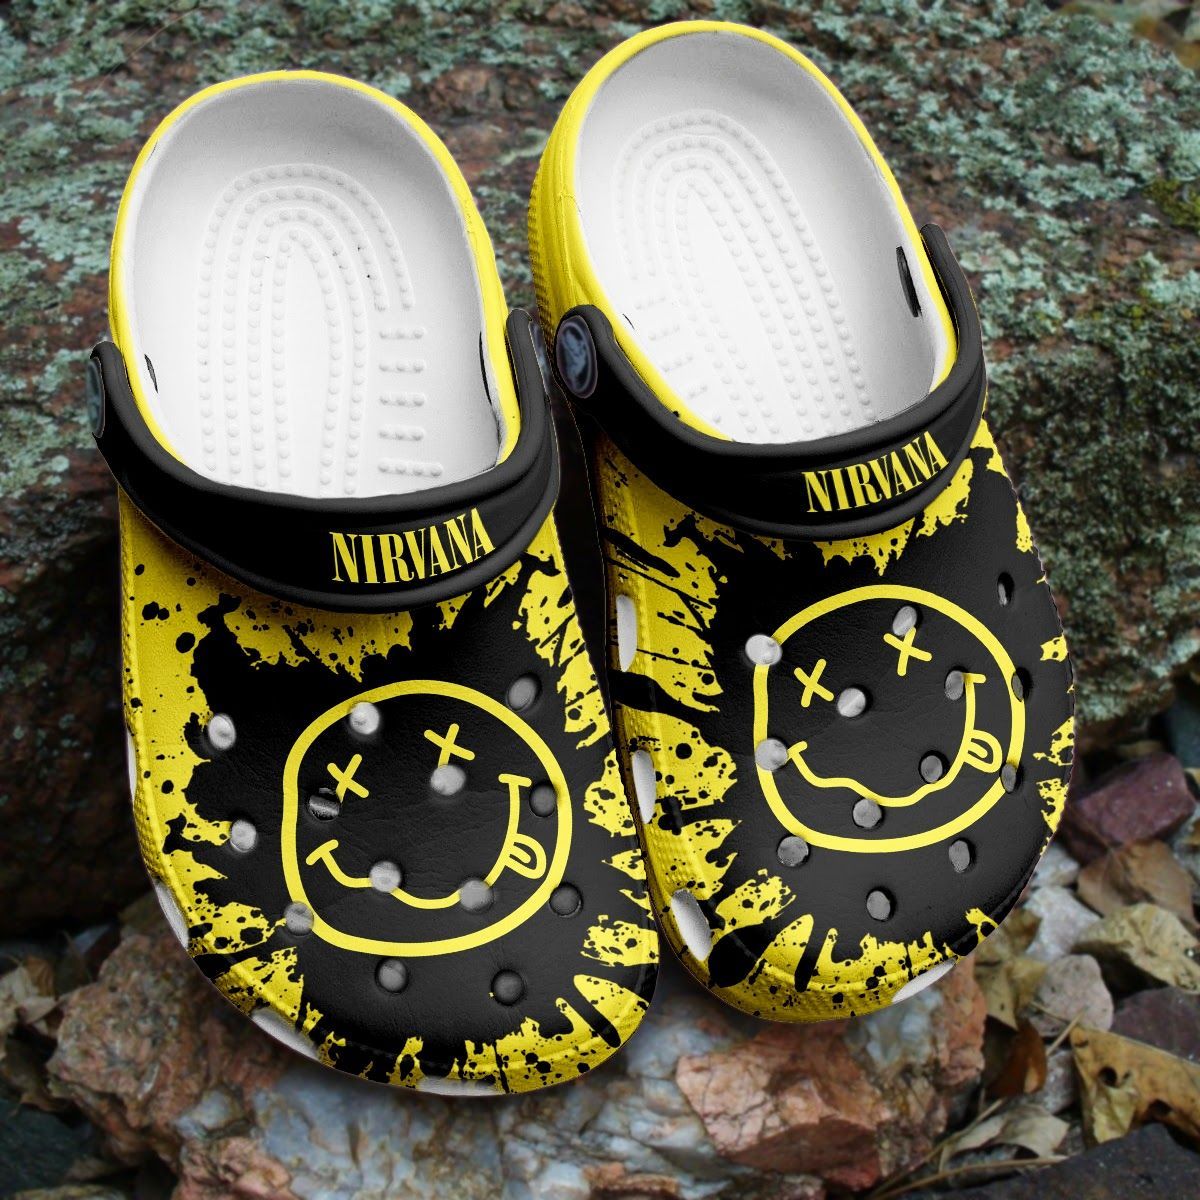 If you'd like to purchase a pair of Crocband Clogs, be sure to check out the official website. 84